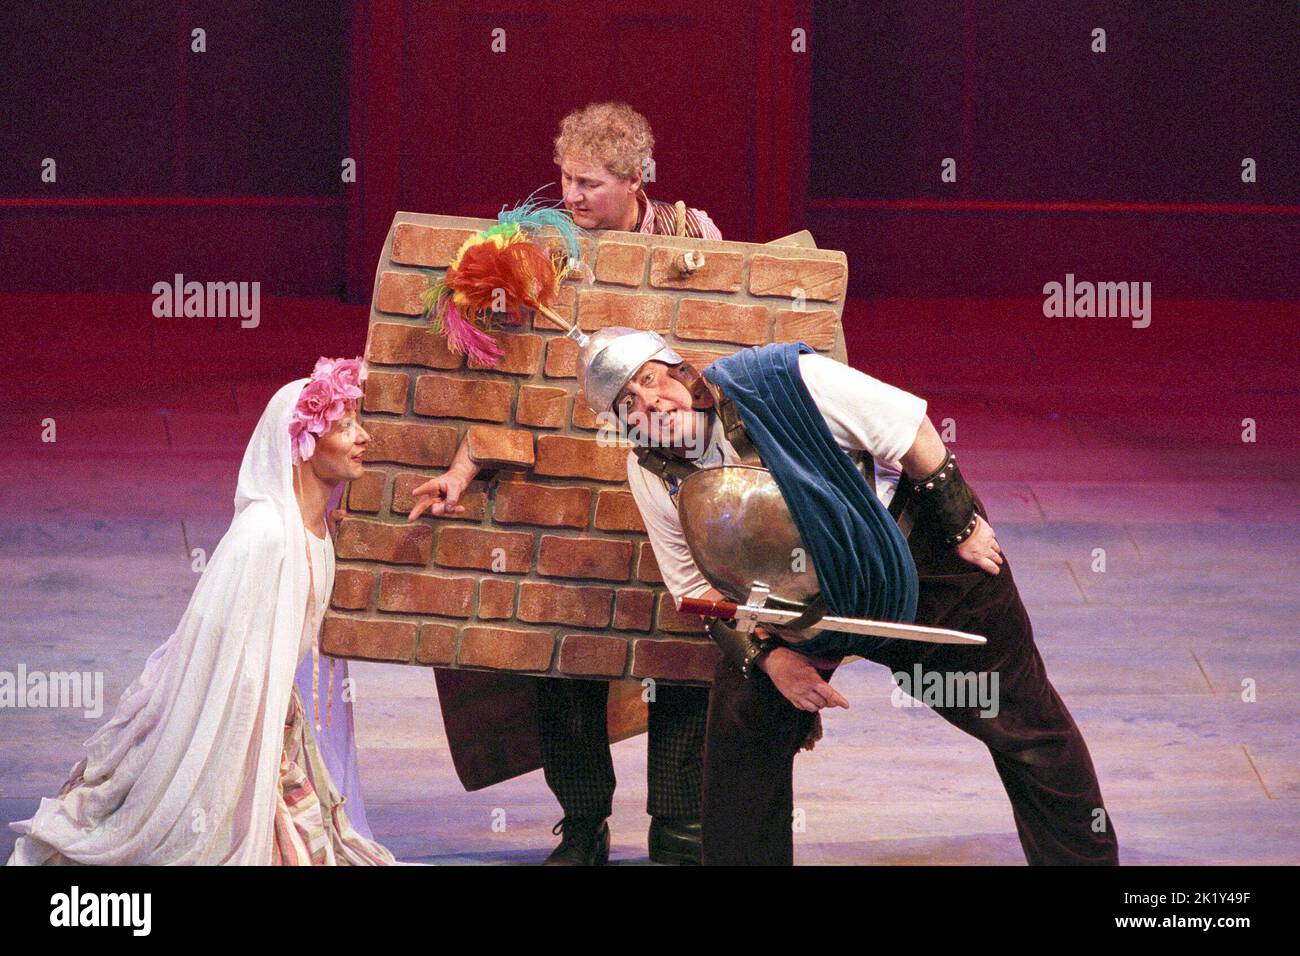 l-r: Daniel Evans (Francis Flute / Thisby), Howard Crossley (Tom Snout / Wall), Desmond Barrit (Bottom / Pyramus) in A MIDSUMMER NIGHT'S DREAM von Shakespeare in the Royal Shakespeare Company (RSC), Barbican Theatre, London EC2 25/04/1995 Musik: Ilona Sekacz Design: Anthony ward Beleuchtung: Chris Parry Bewegung: Sue Lefton Regie: Adrian Noble Stockfoto